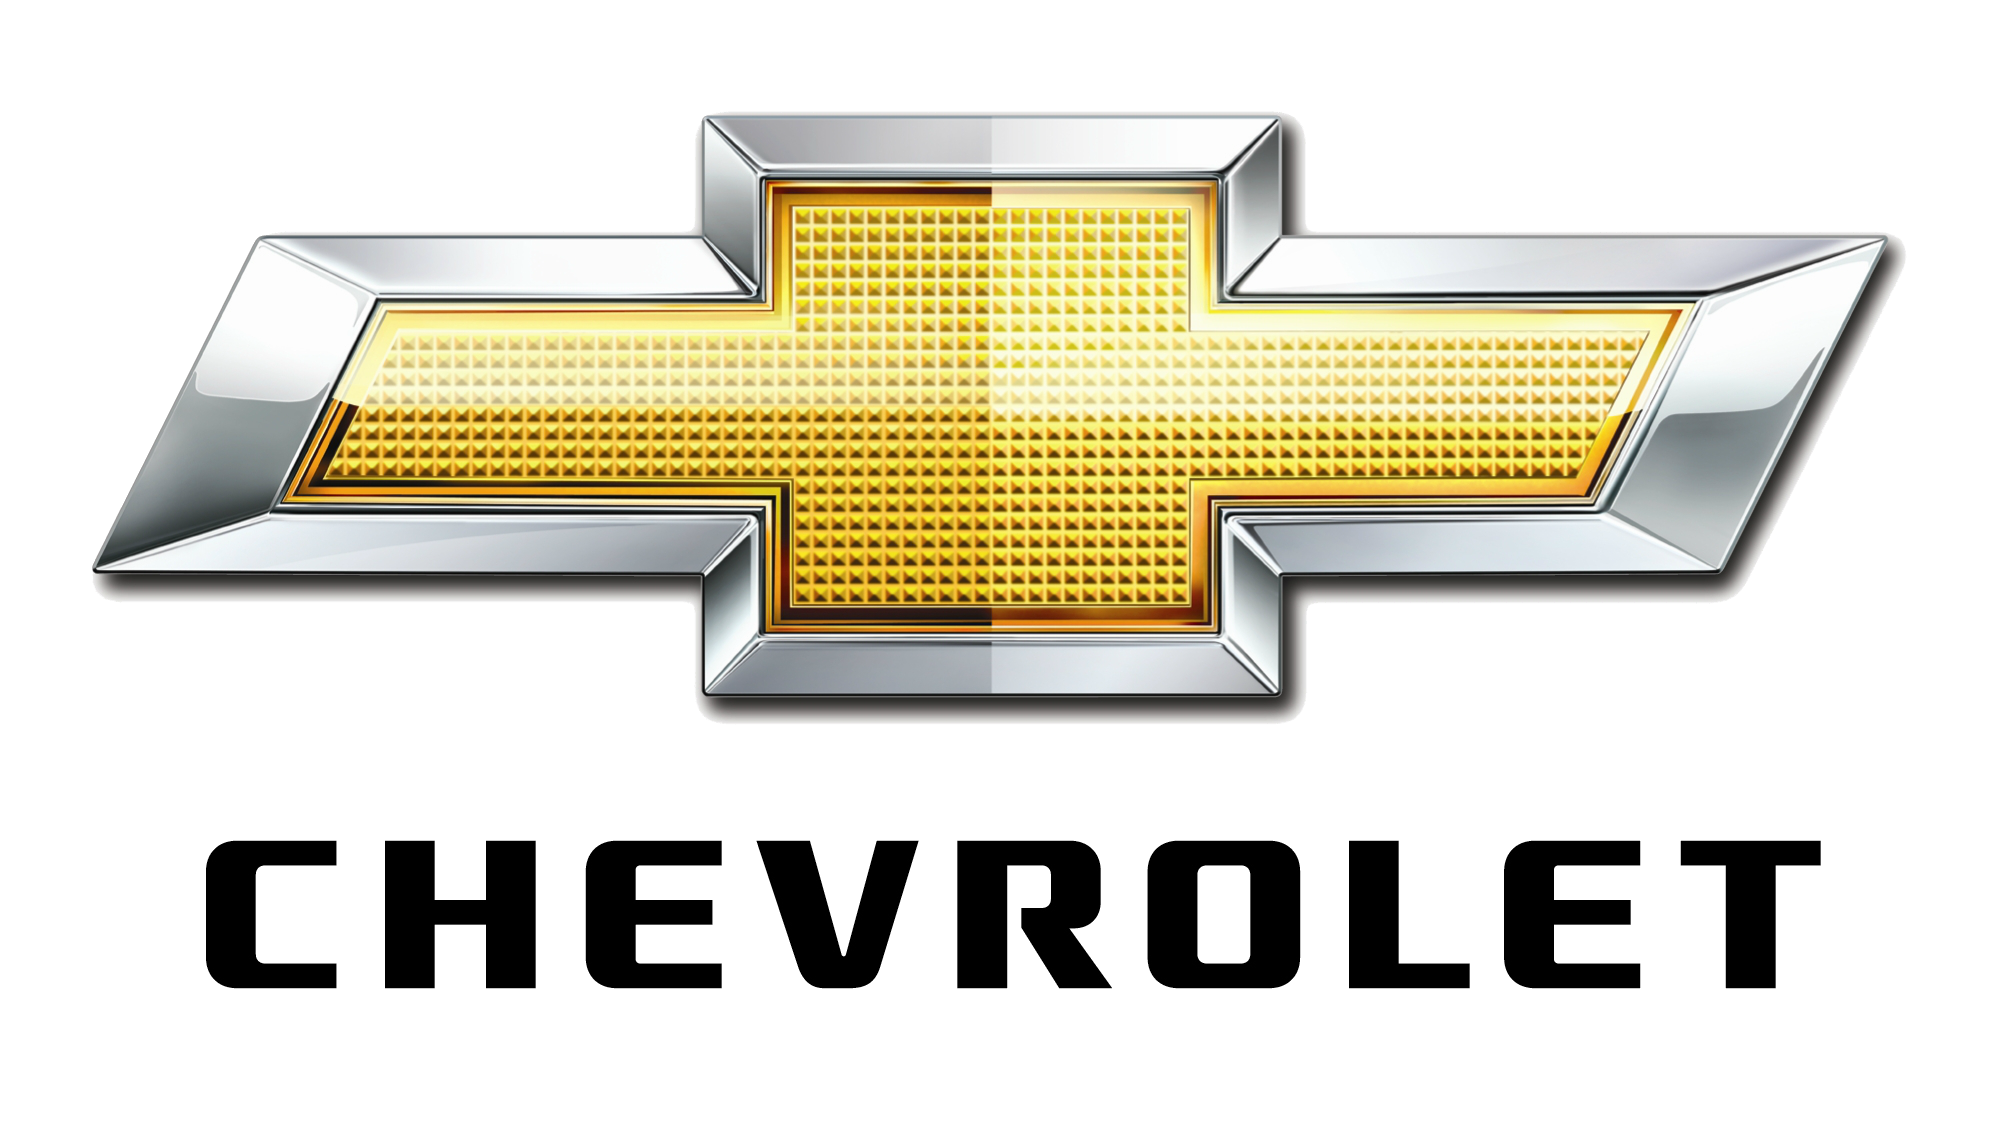 The Chevrolet Chronicle